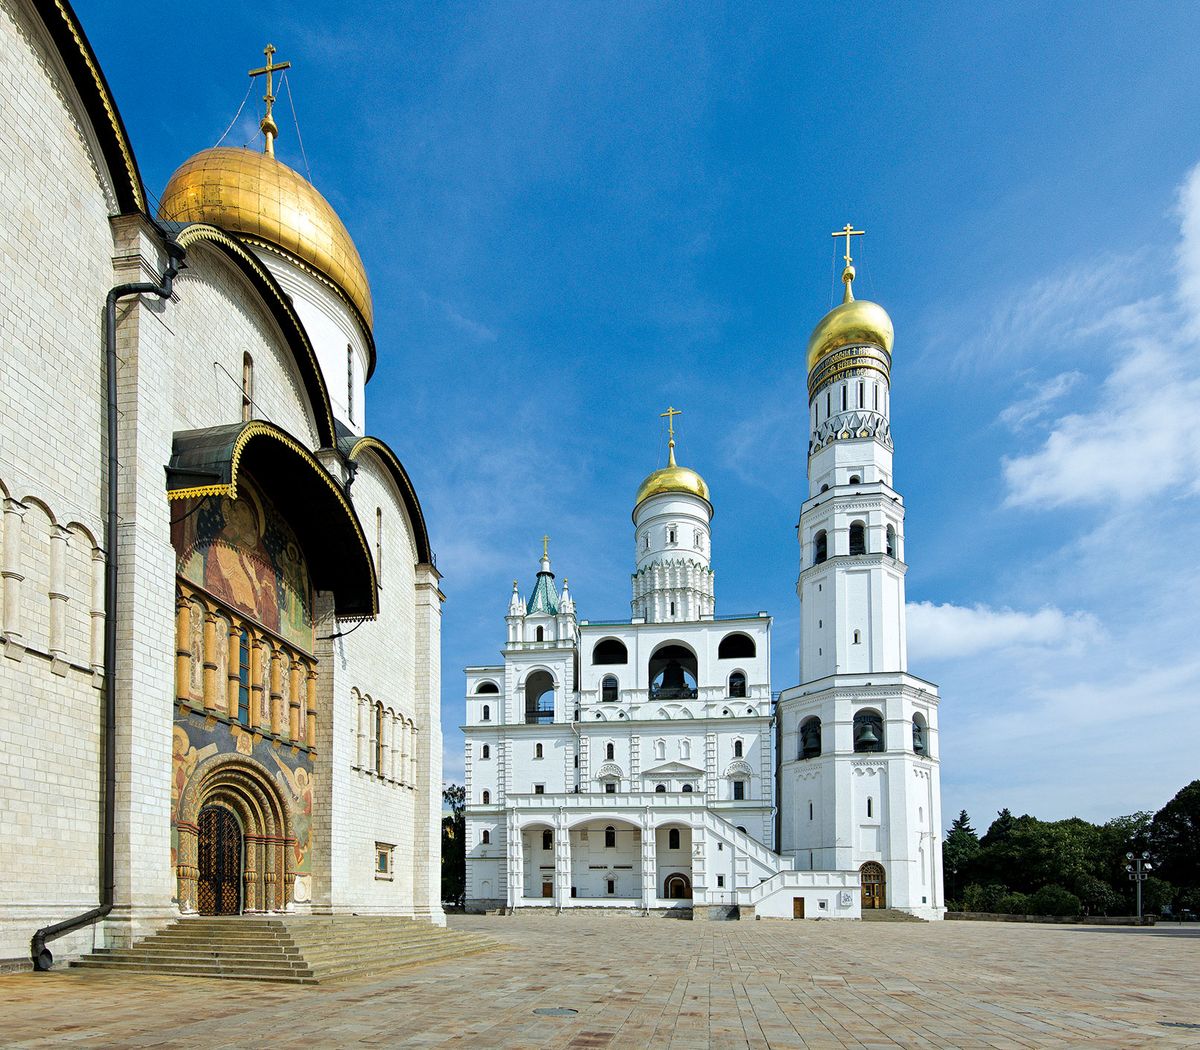 Restored masterpieces of the Moscow Kremlin Museums will be displayed at the Assumption Belfry (pictured) and Patriarch’s Palace Courtesy of the Moscow Kremlin Museums